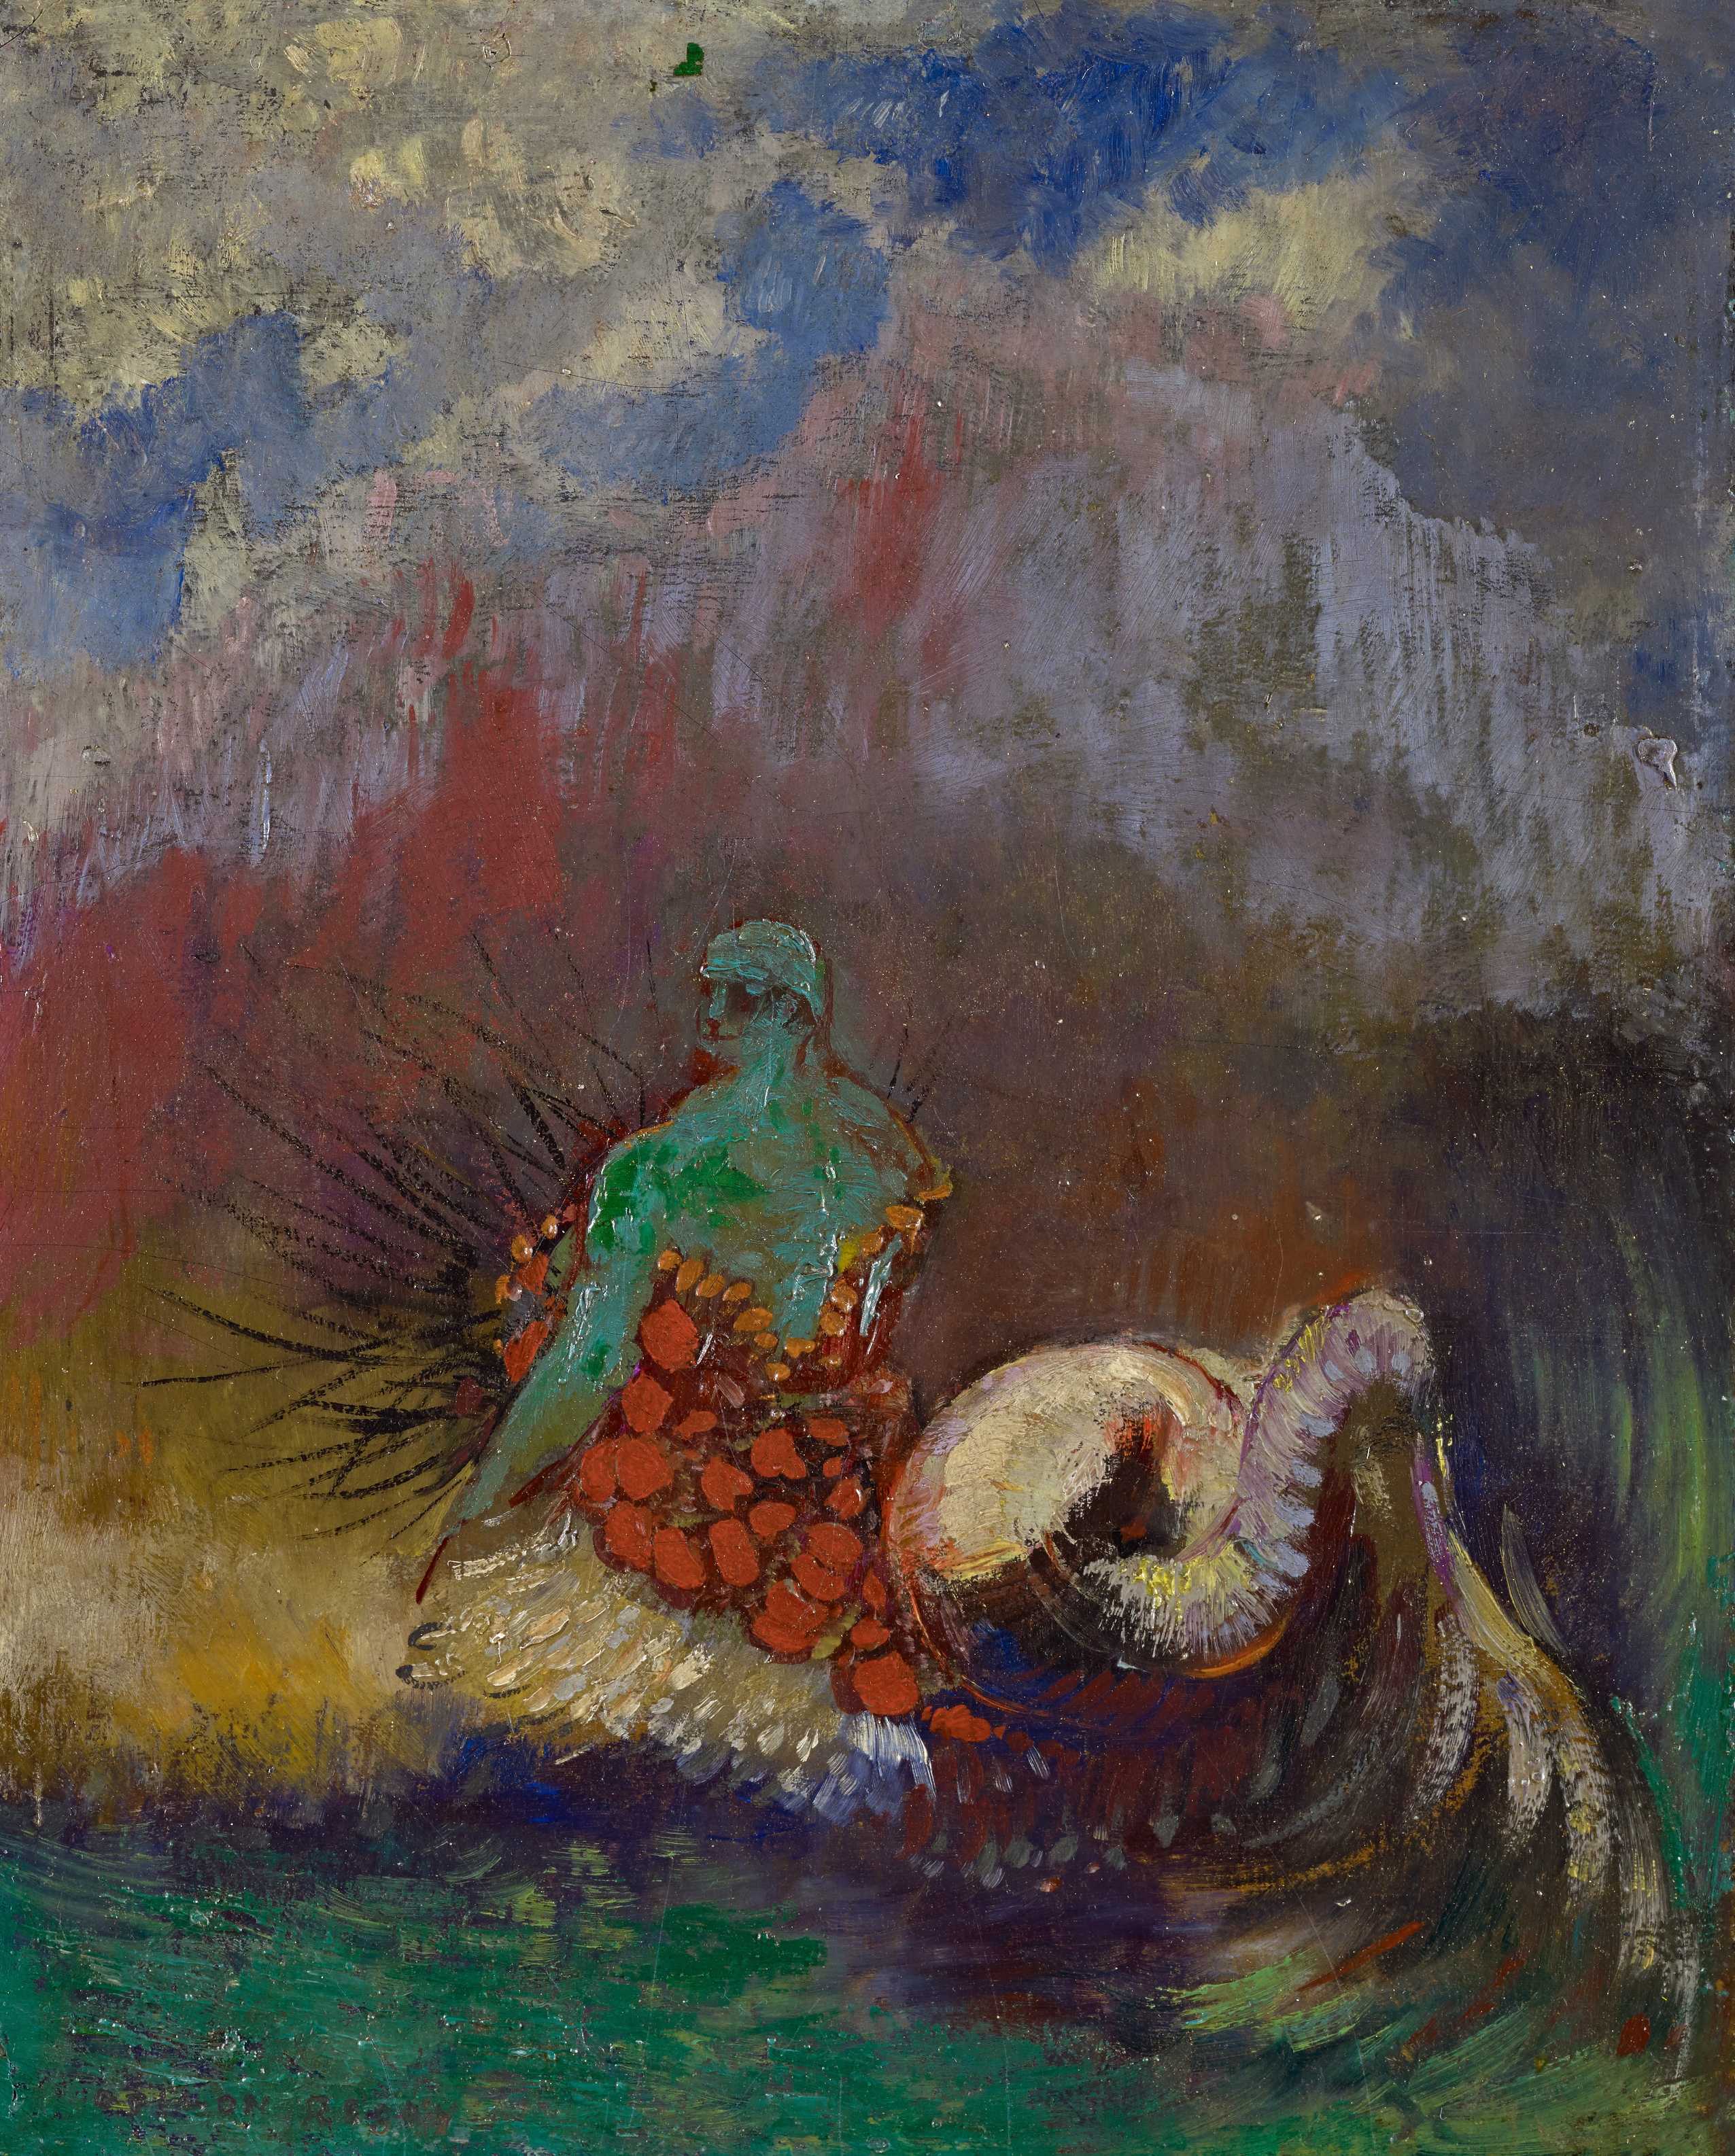 Find out more about Odilon Redon - Siren